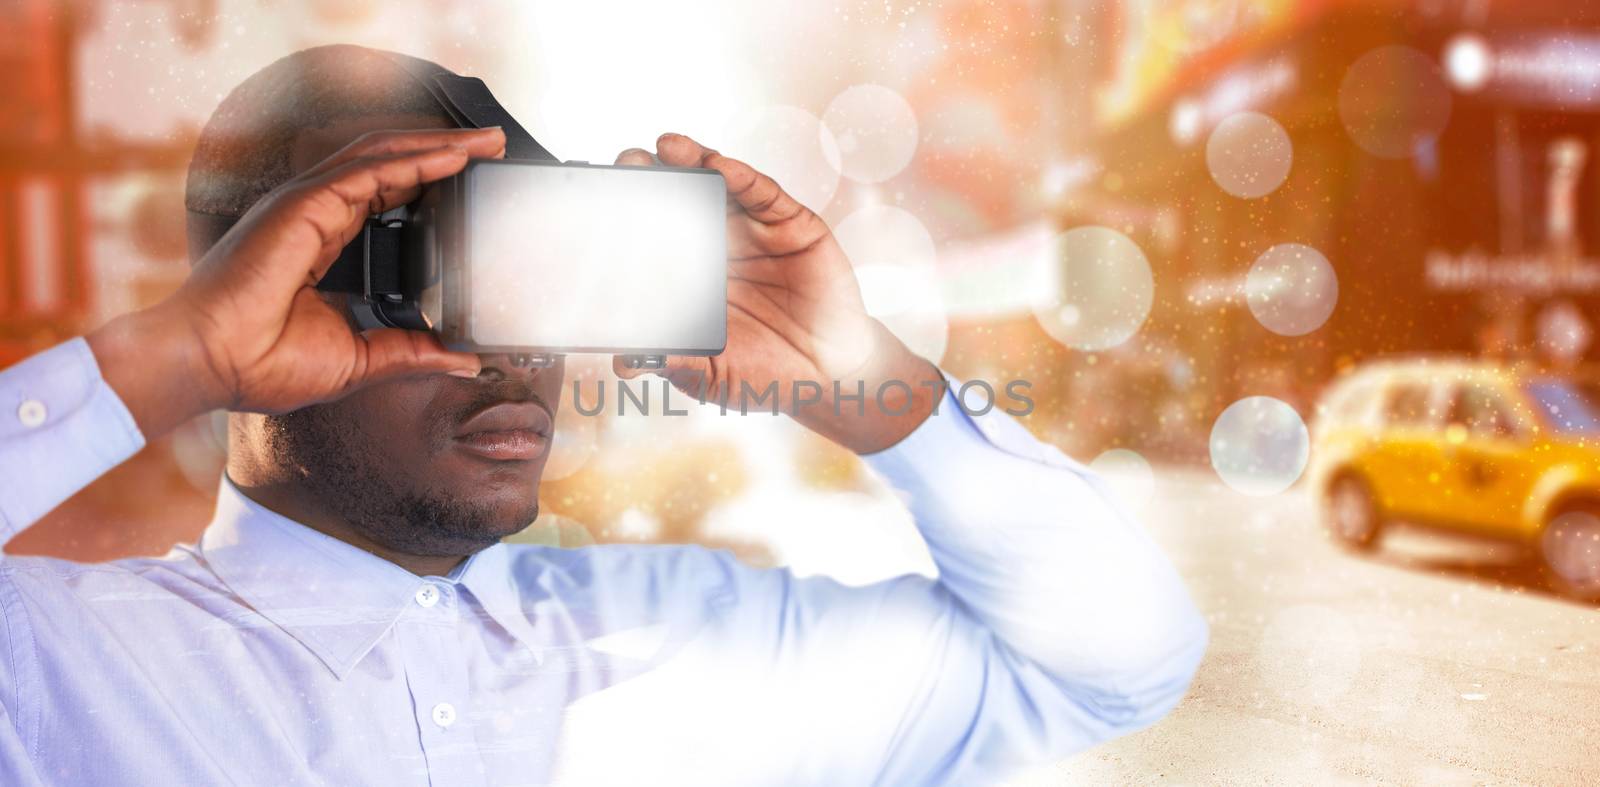 Composite image of man holding virtual reality headset by Wavebreakmedia